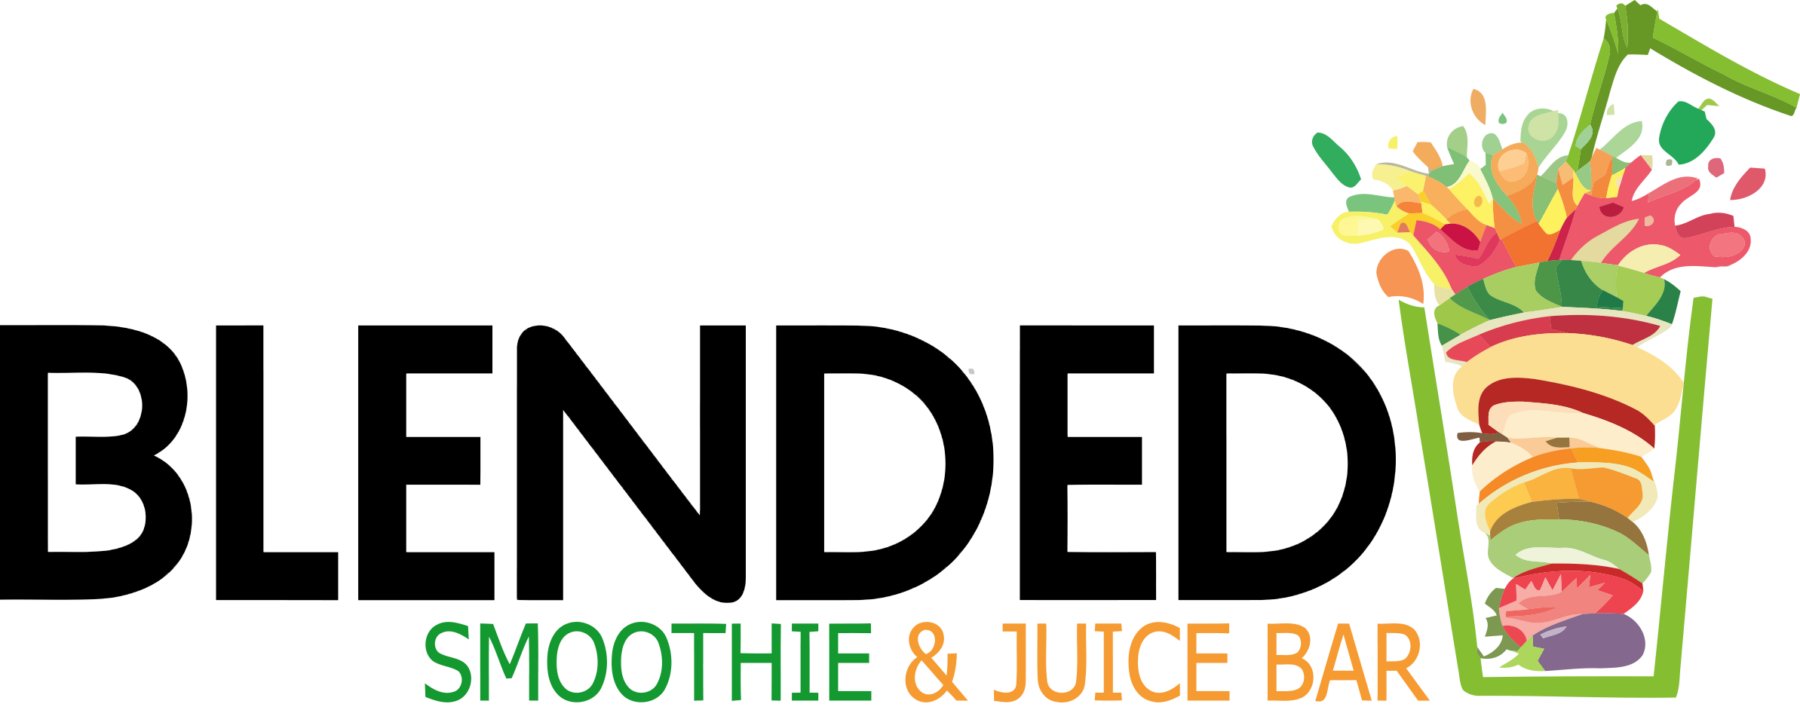 blended smoothie and juice bar